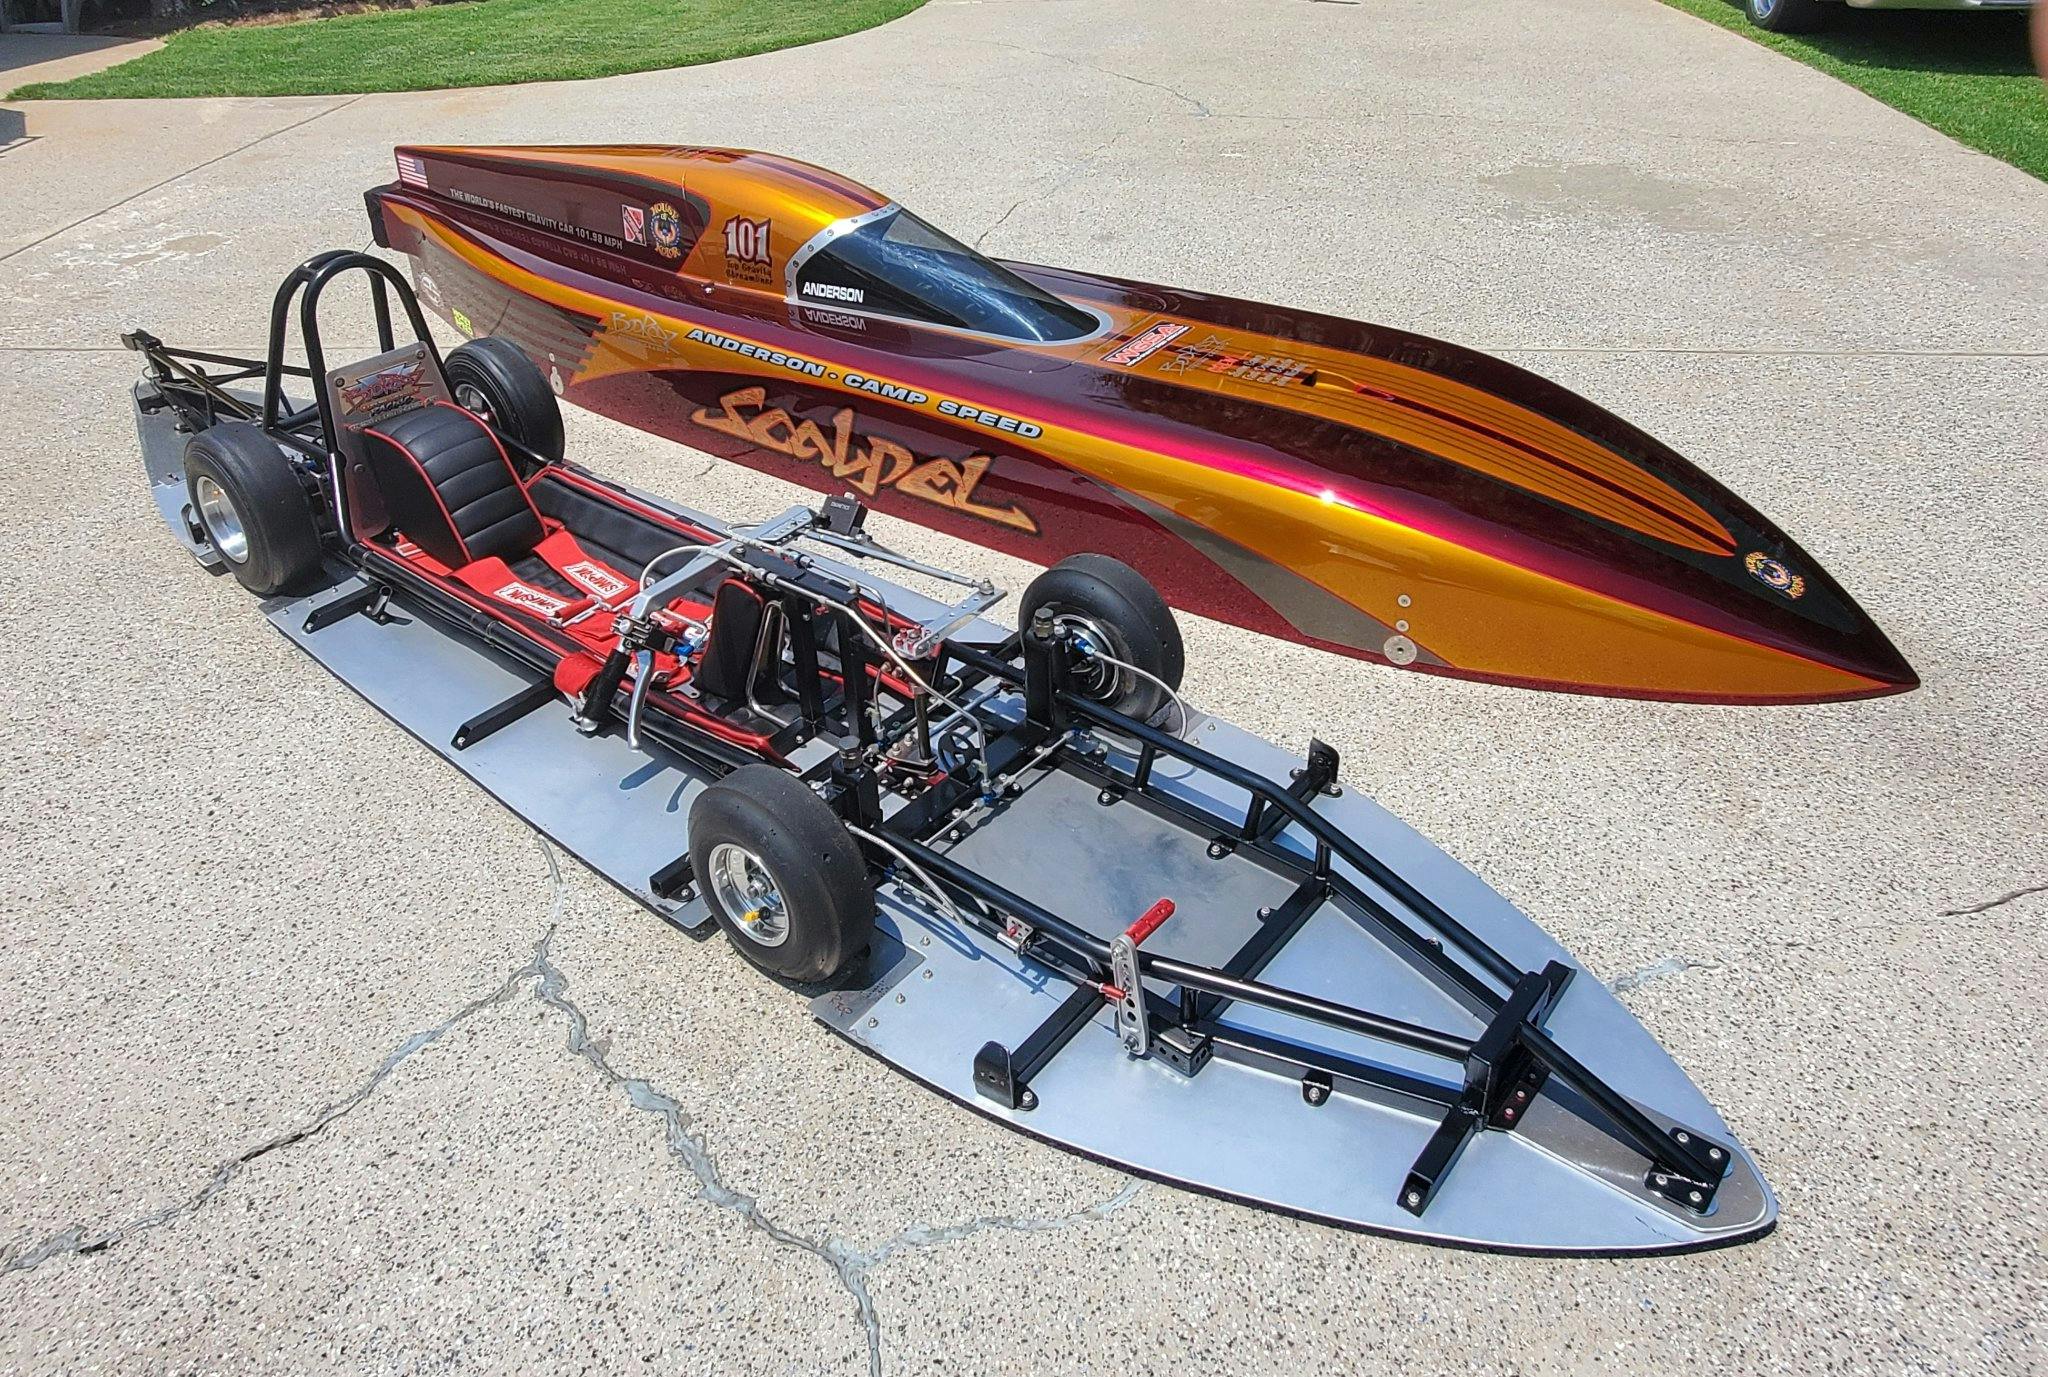 Homegrown: "Atomic Scalpel" tops 100 mph with gravity alone